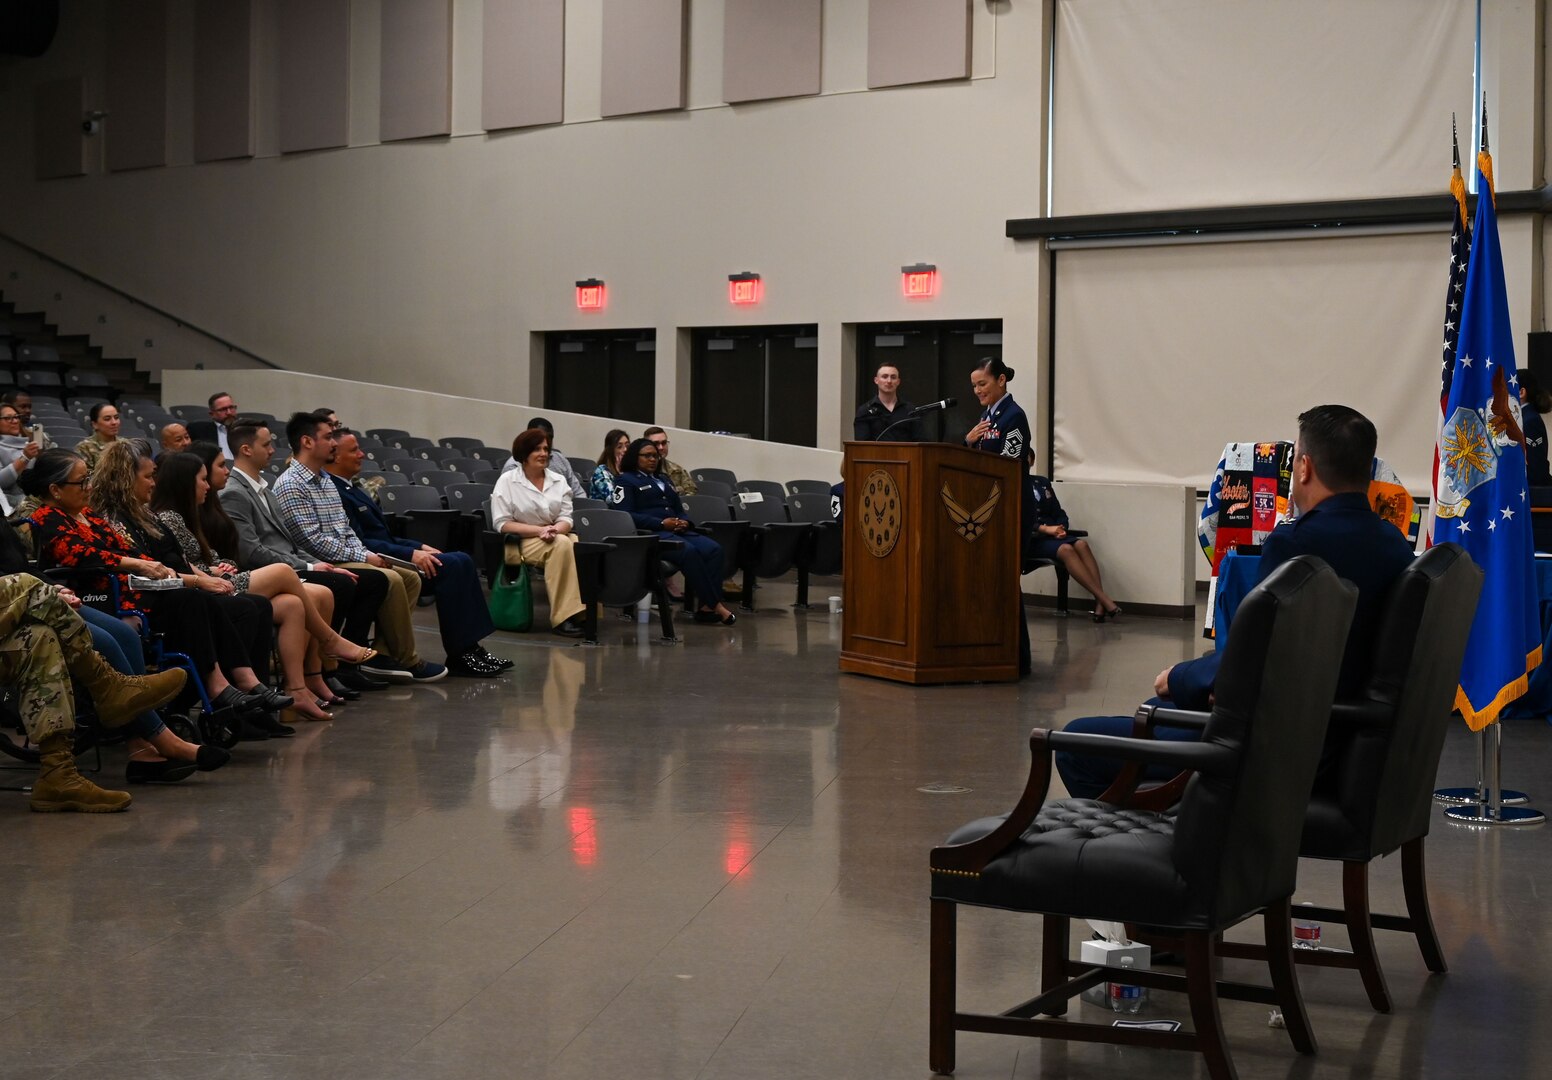 Ret. Chief Master Sgt. Billie Baber, former 960th Cyberspace Wing command chief, delivers a speech during her retirement ceremony, Nov. 4, 2022, at Joint Base San Antonio-Lackland, Texas. Baber entered the Air Force in 1996 and dedicated 26 years to military service. (U.S. Air Force photo by Staff Sgt. Adriana Barrientos)